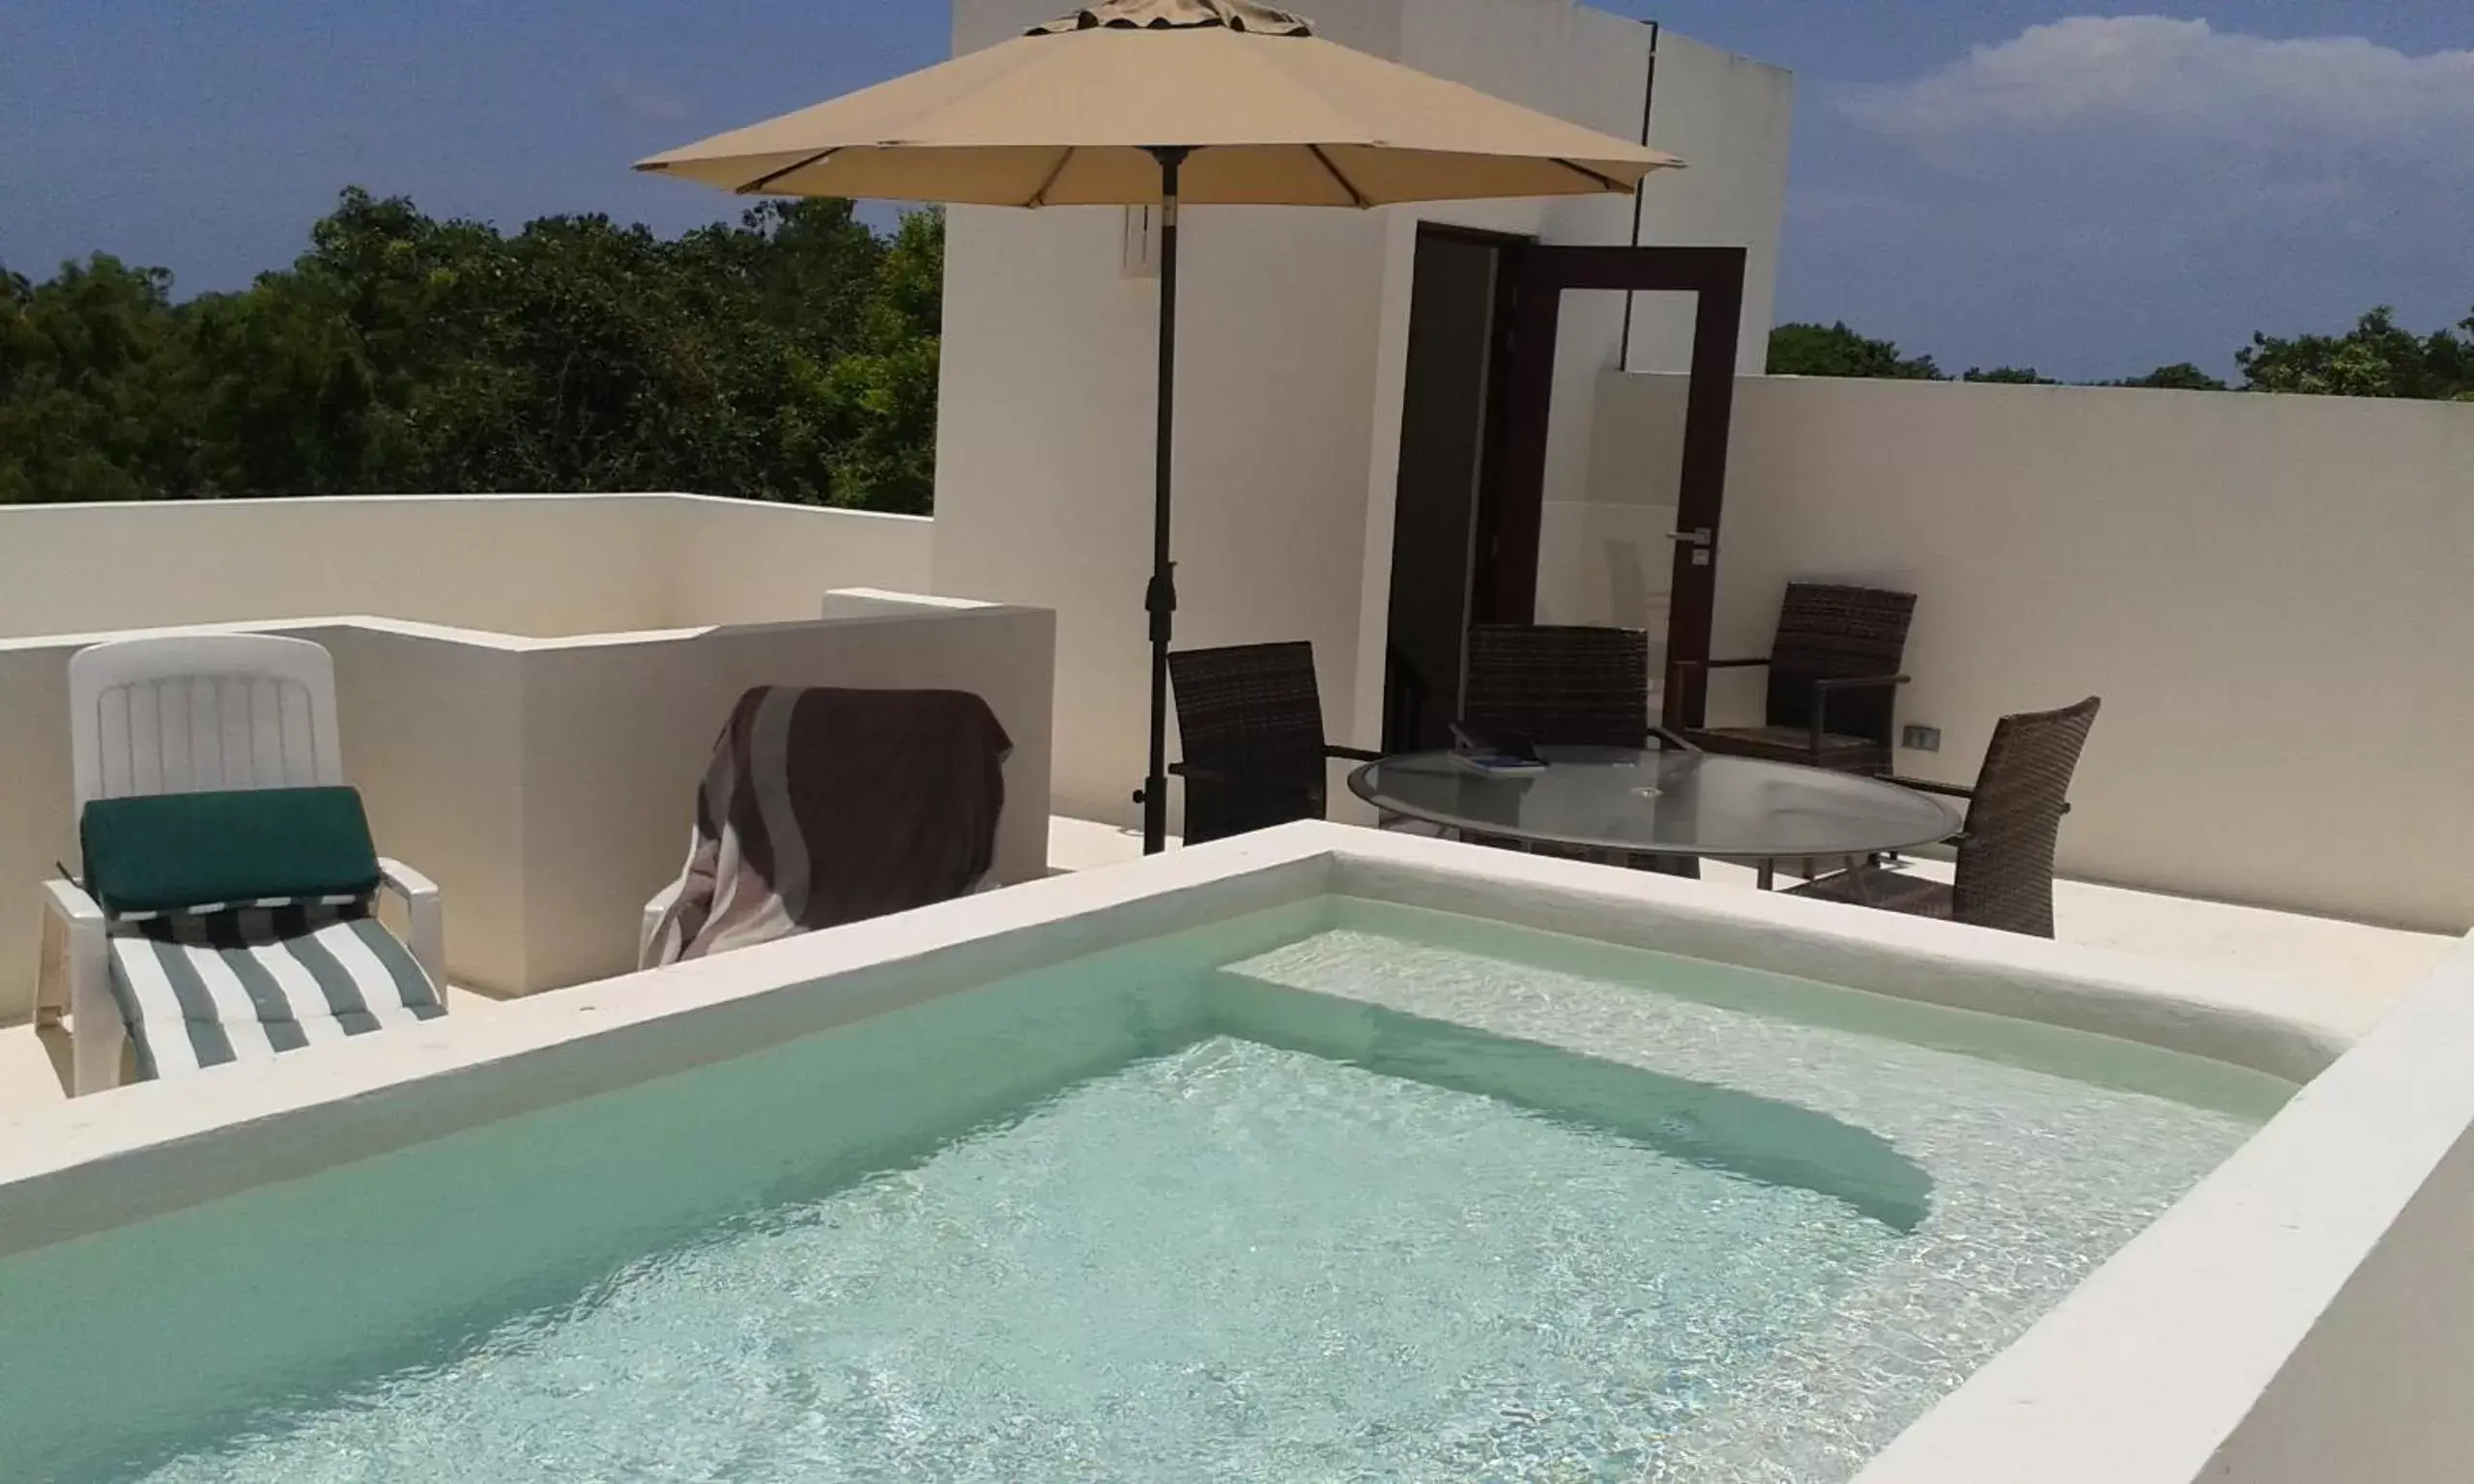 Penthouse Apartment with Private Pool and Jacuzzi in Mak Nuk Village - Clothing Optional